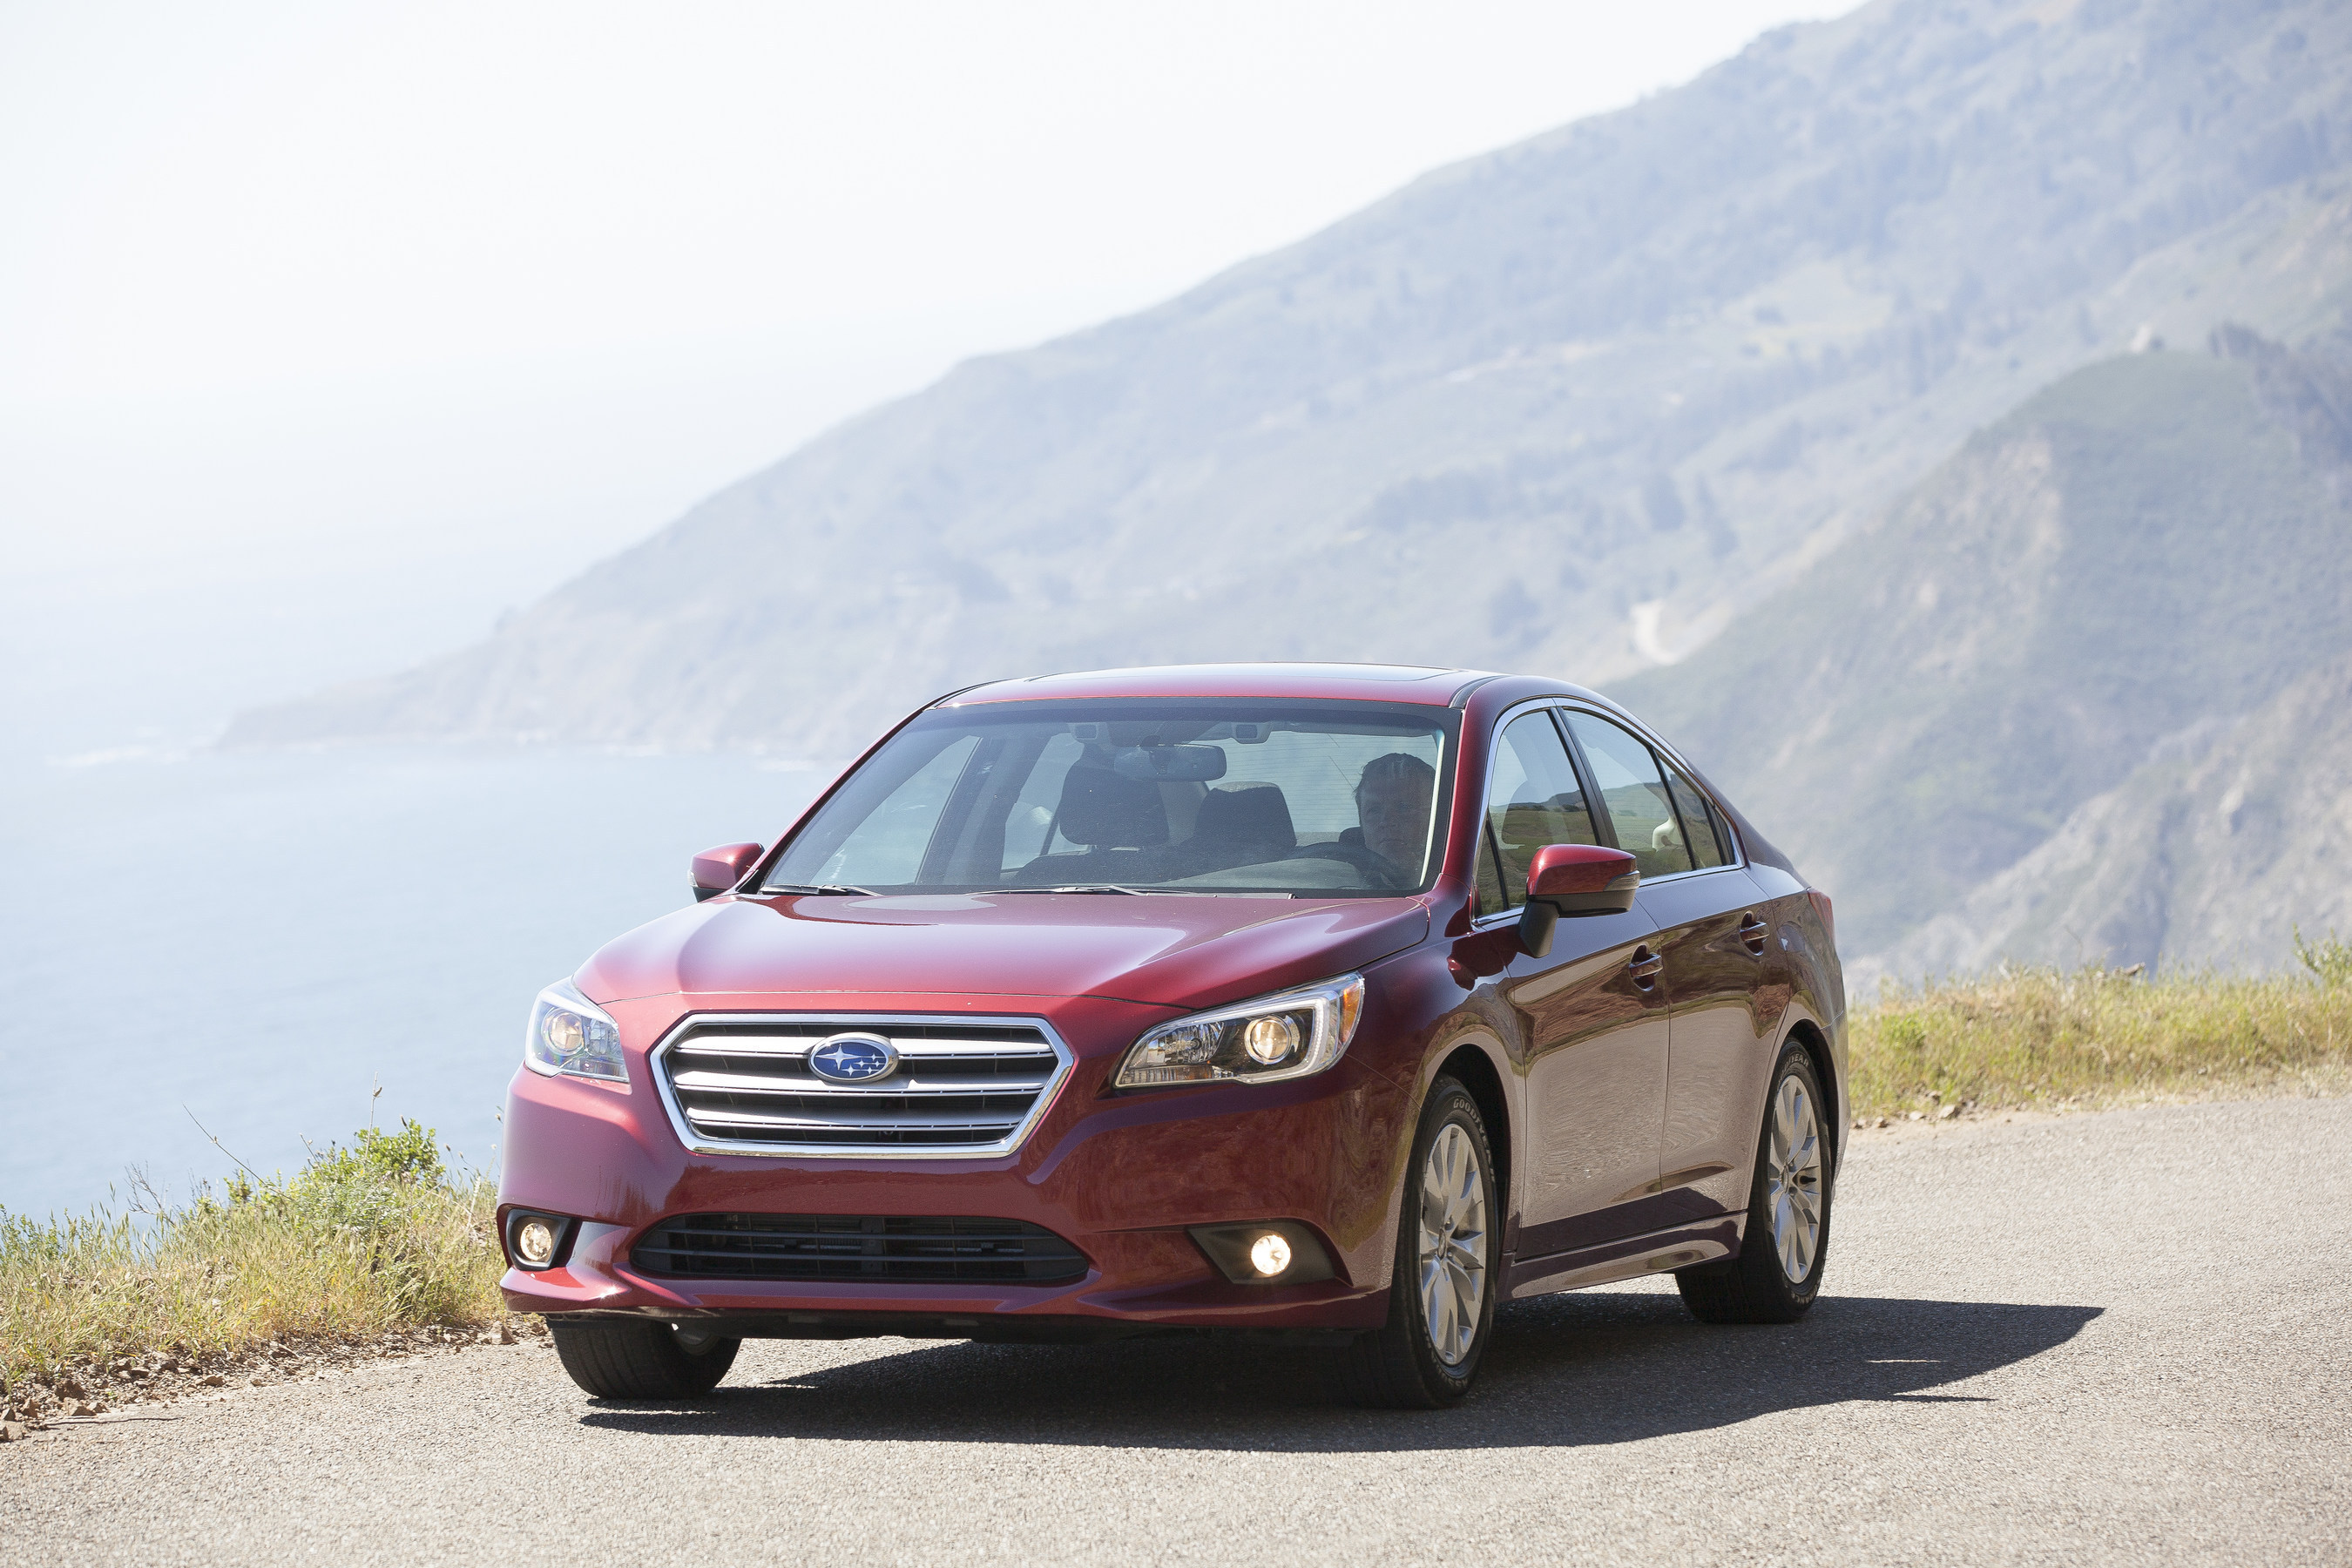 The Car Connection has named the all-new 2015 Subaru Legacy as its "Best Car to Buy 2015."